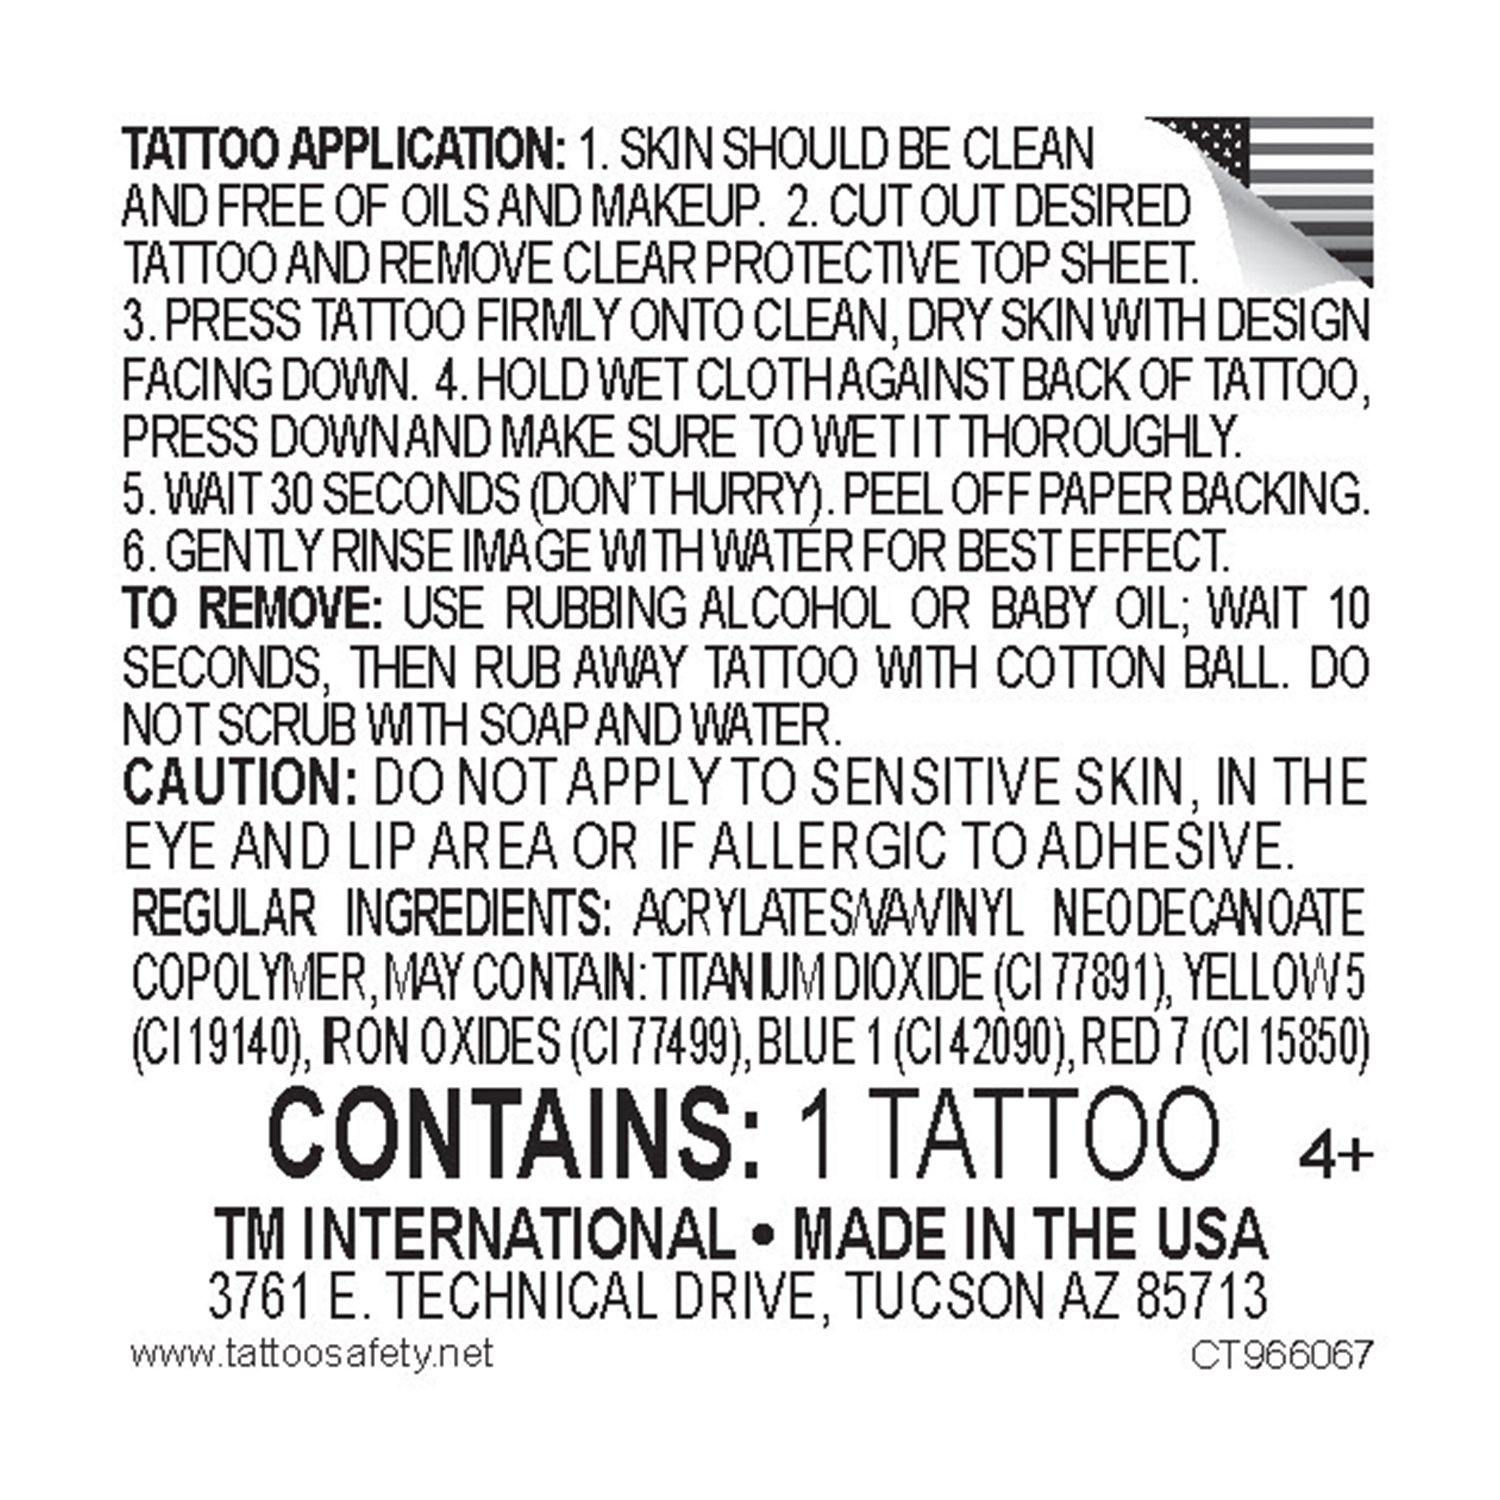 Temp Tattoo Sample Pack #2 - 3 Pairs - Fitzpatrick Colors: 3, 4 and 5 - Restorative Ink Specialists